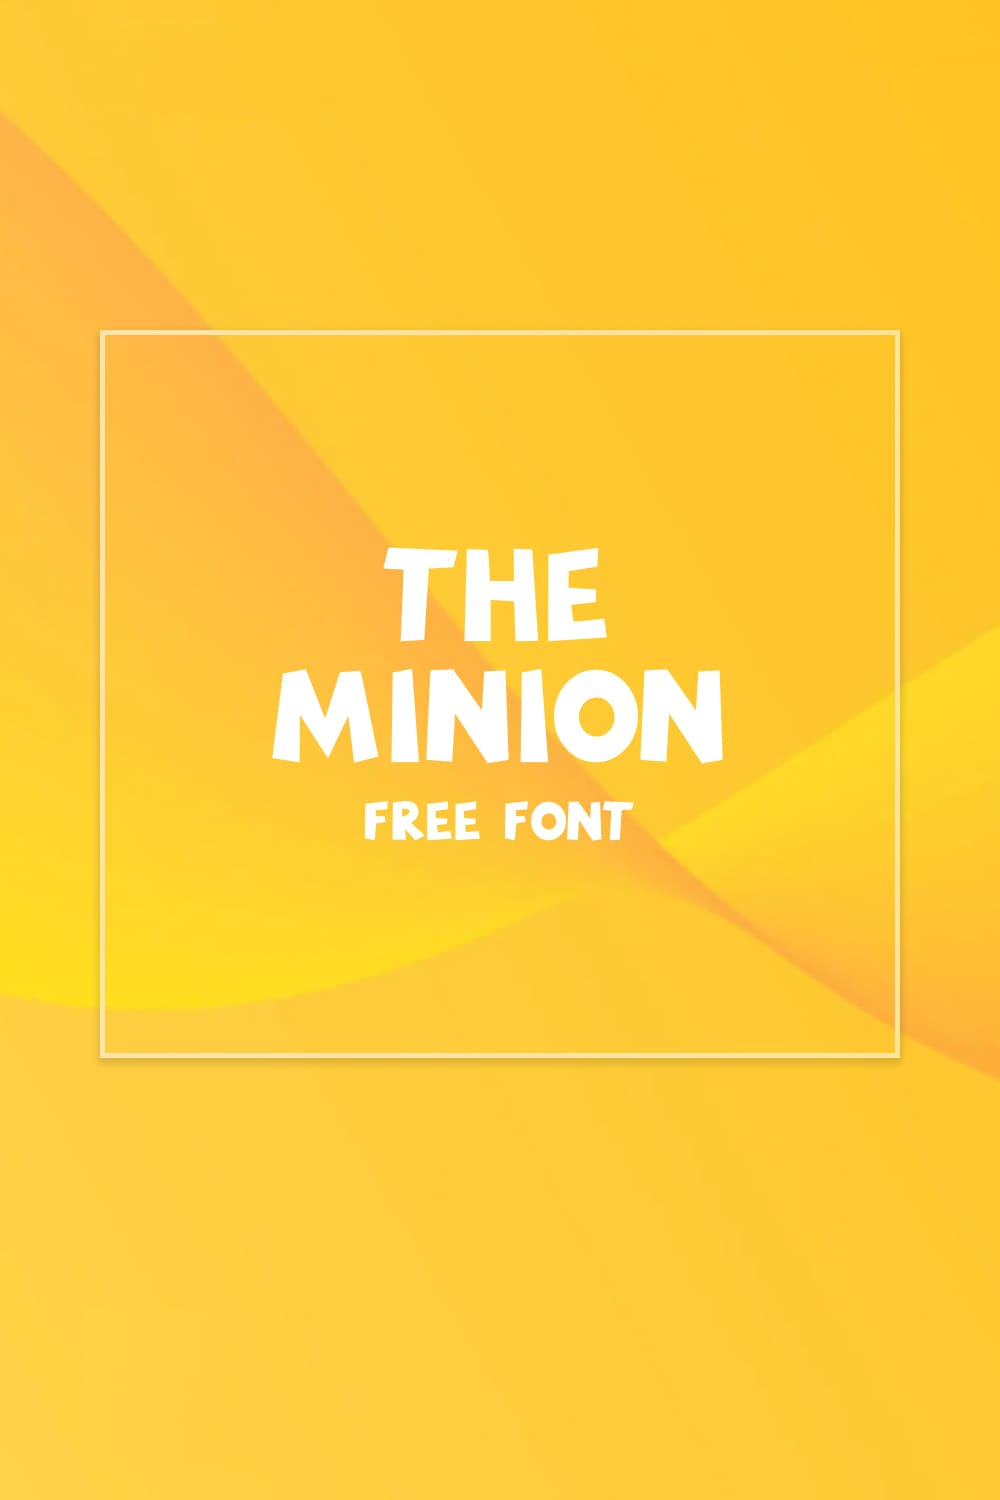 Minions Font name on yellow background.